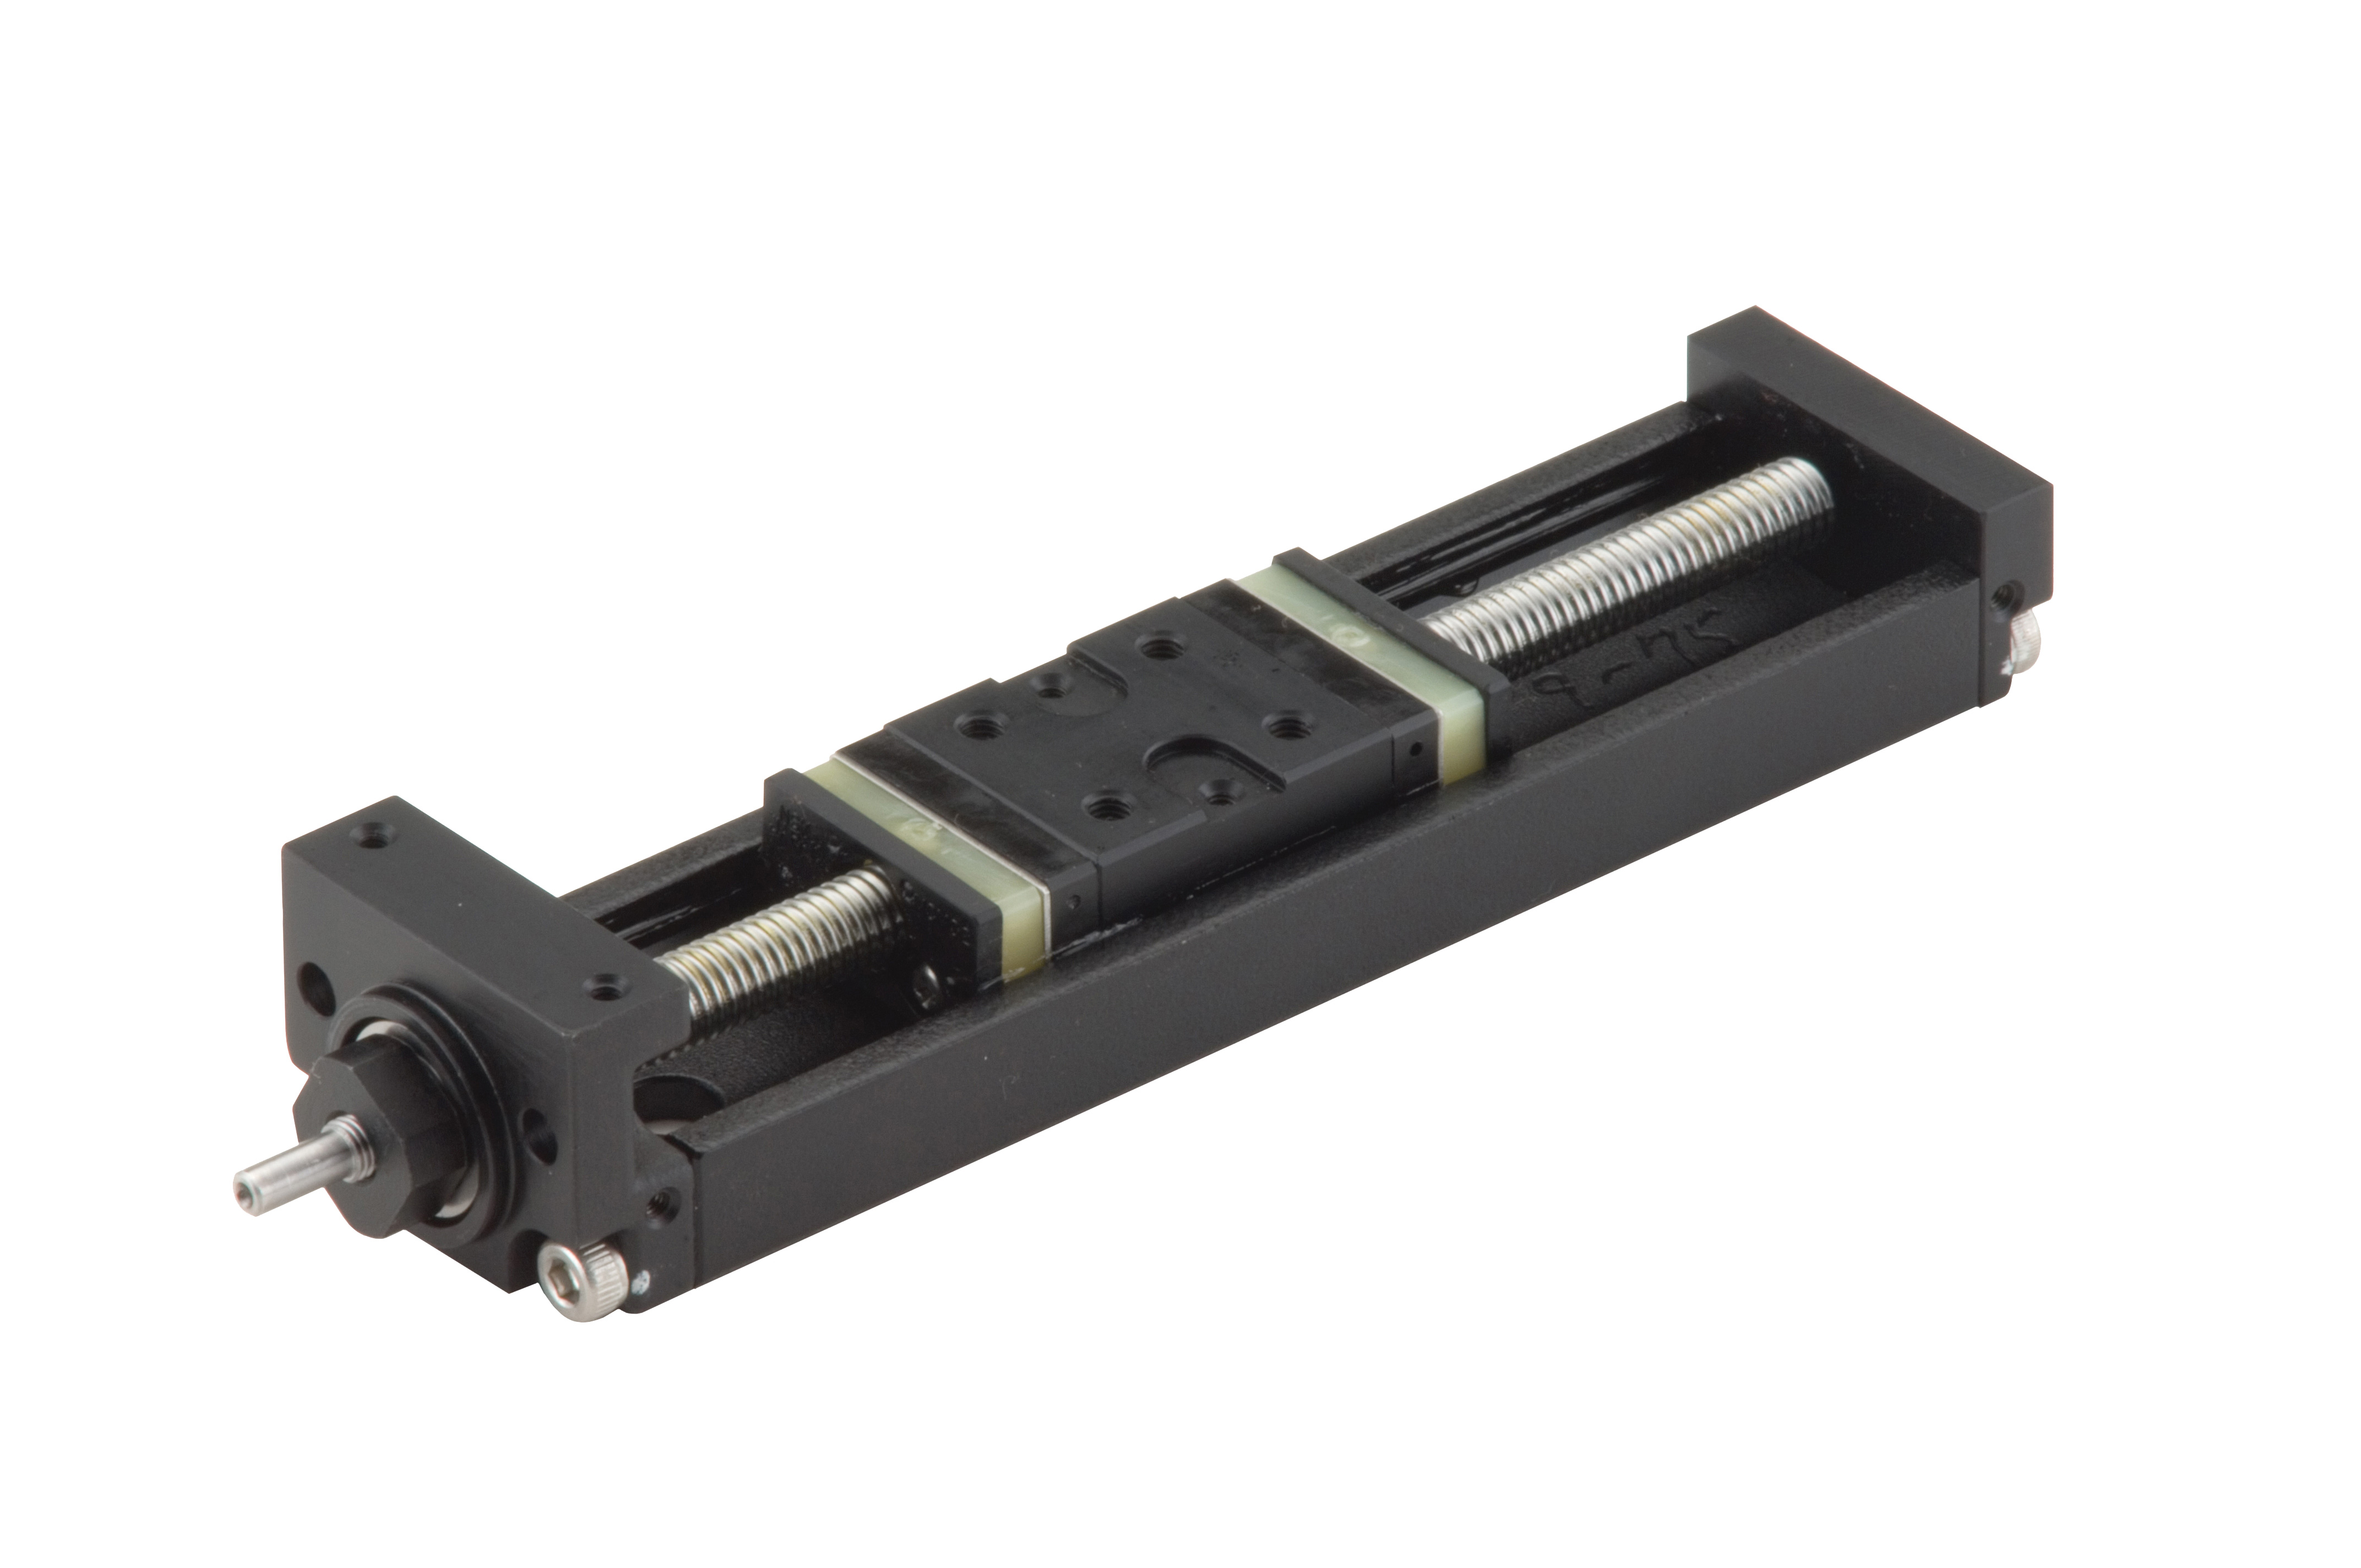 NSK’s MCM Series Monocarrier includes a ballscrew, linear guide and supports in one compact structure. It boosts accuracy and reduces installation time, and some versions are available through a Quick Ship Program.